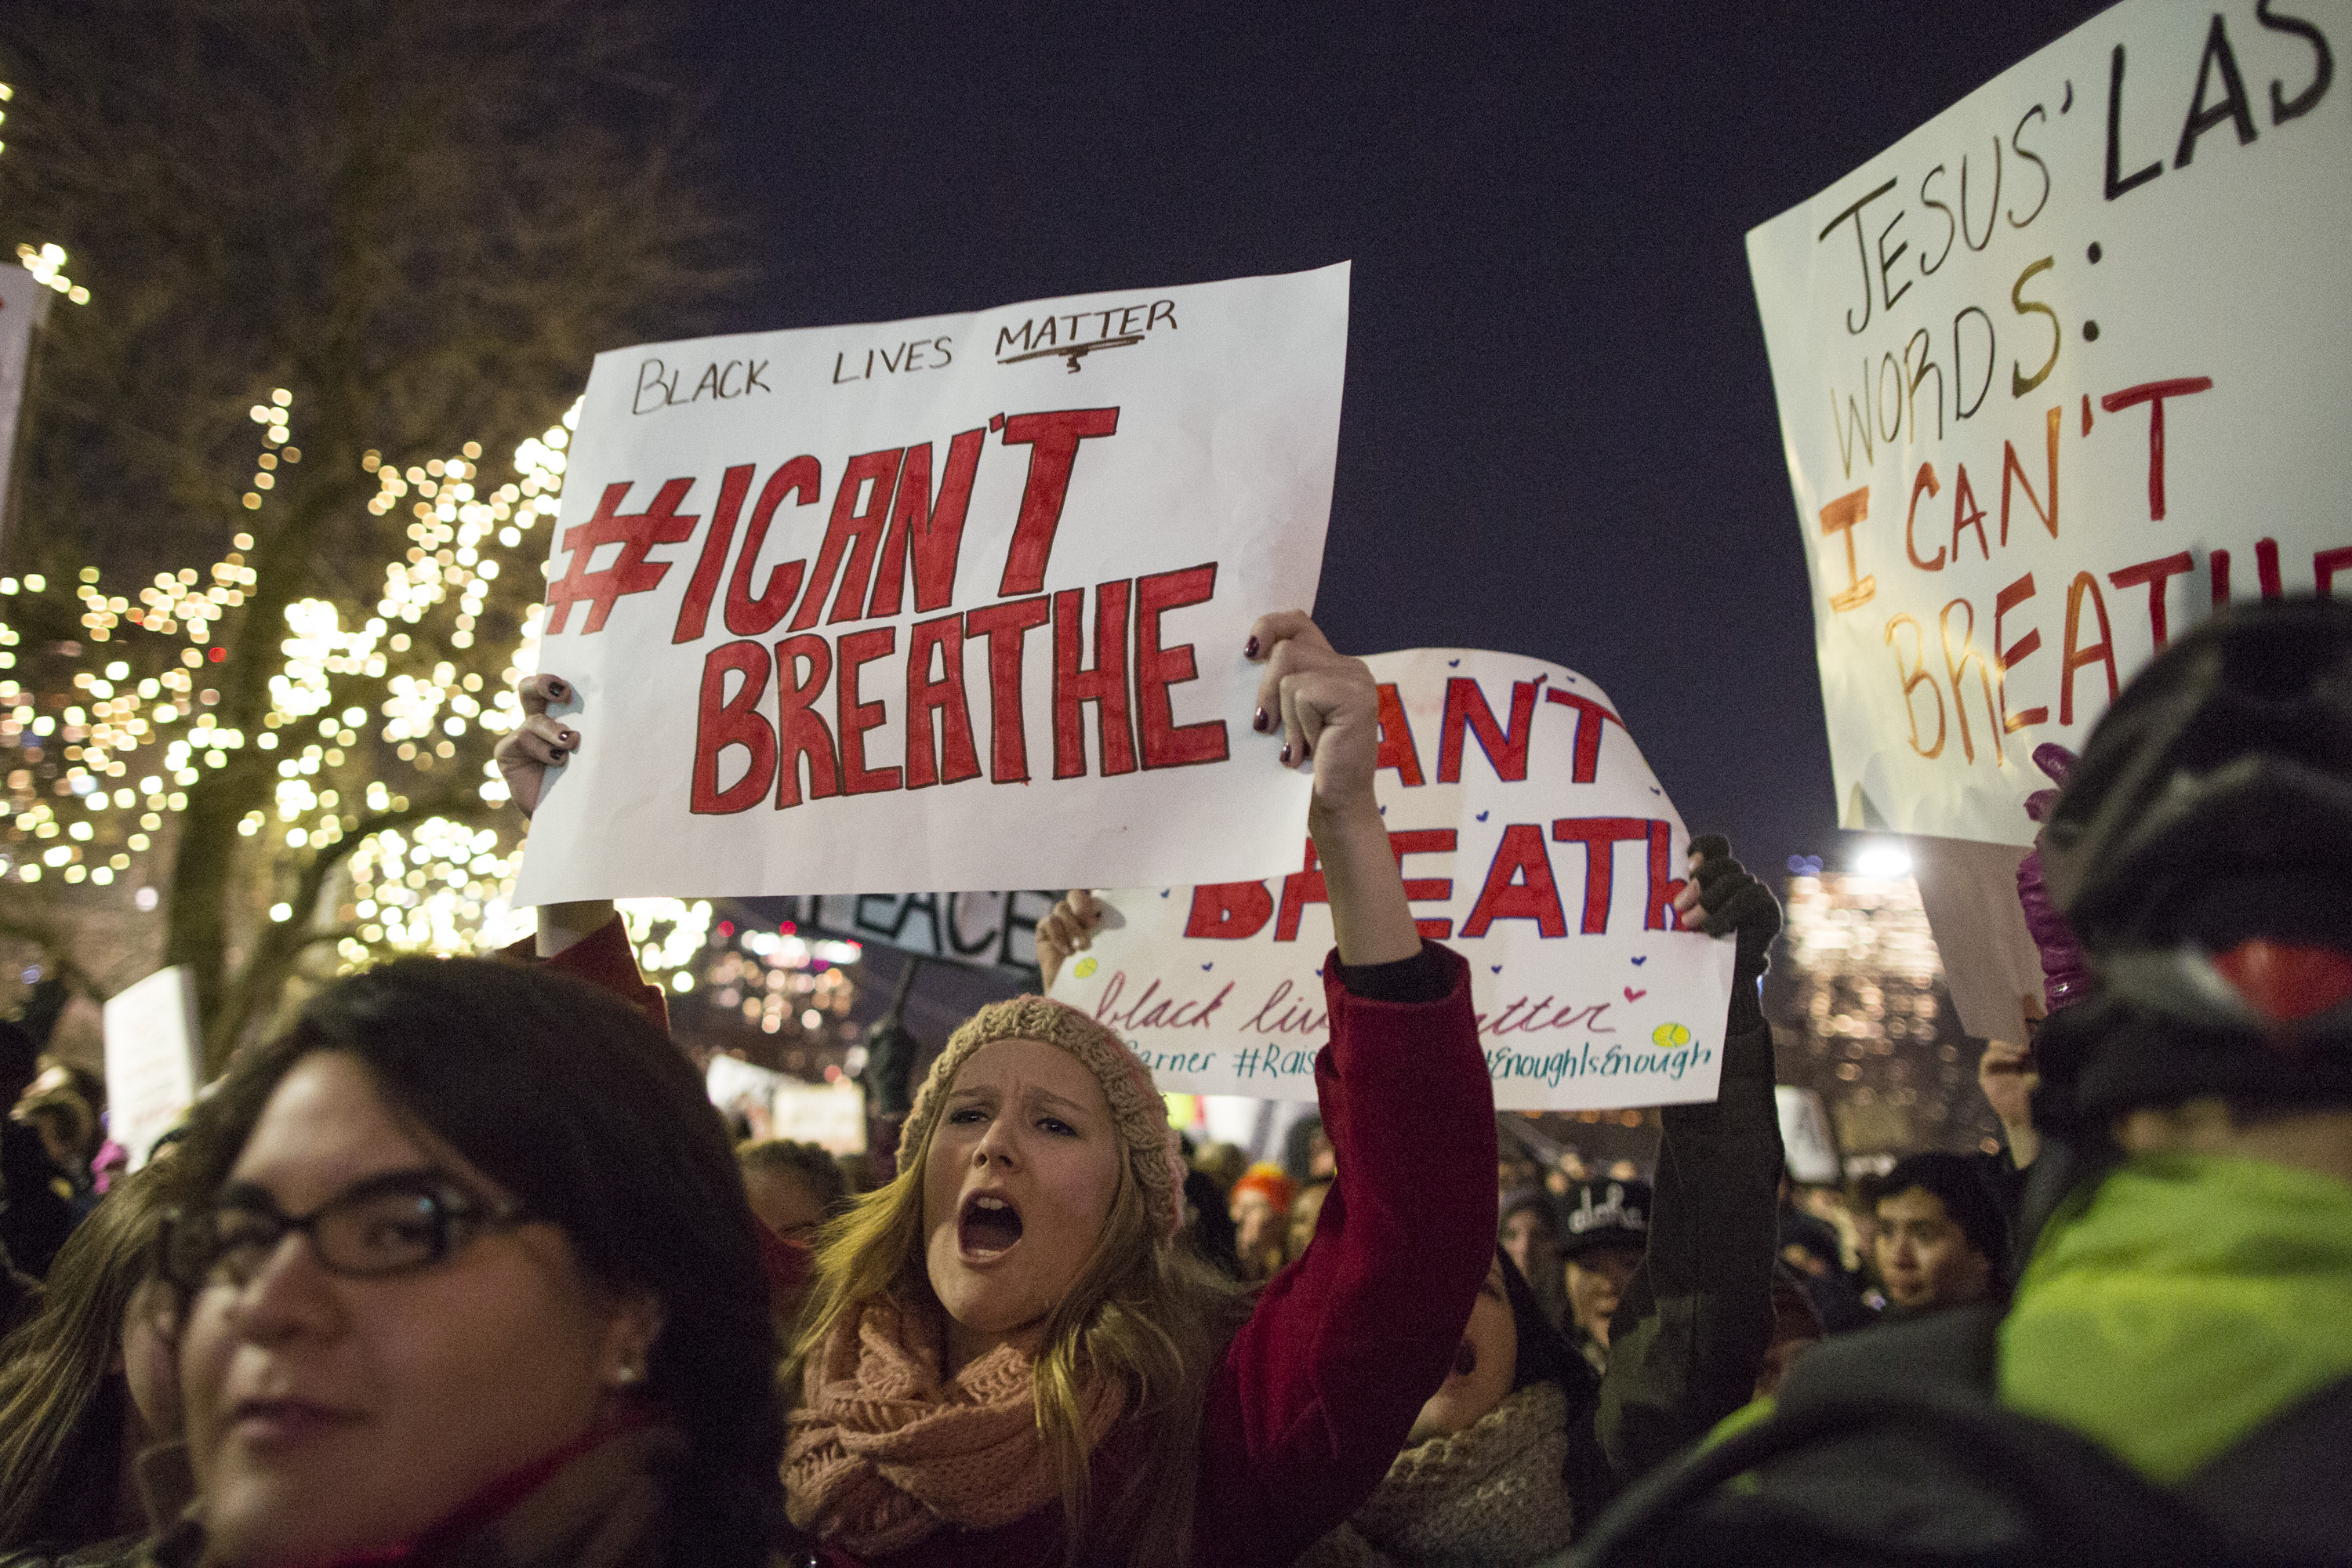 BOSTON, MA - DECEMBER 4: Protesters march while chanting and holding signs during a protest against the decision by a Staten Island grand jury not to indict a police officer who used a chokehold in the death of Eric Garner in July, on December 4, 2014 in Boston, Massachusetts. The grand jury declined to indict New York City Police Officer Daniel Pantaleo in Garner's death. (Photo by Scott Eisen/Getty Images)